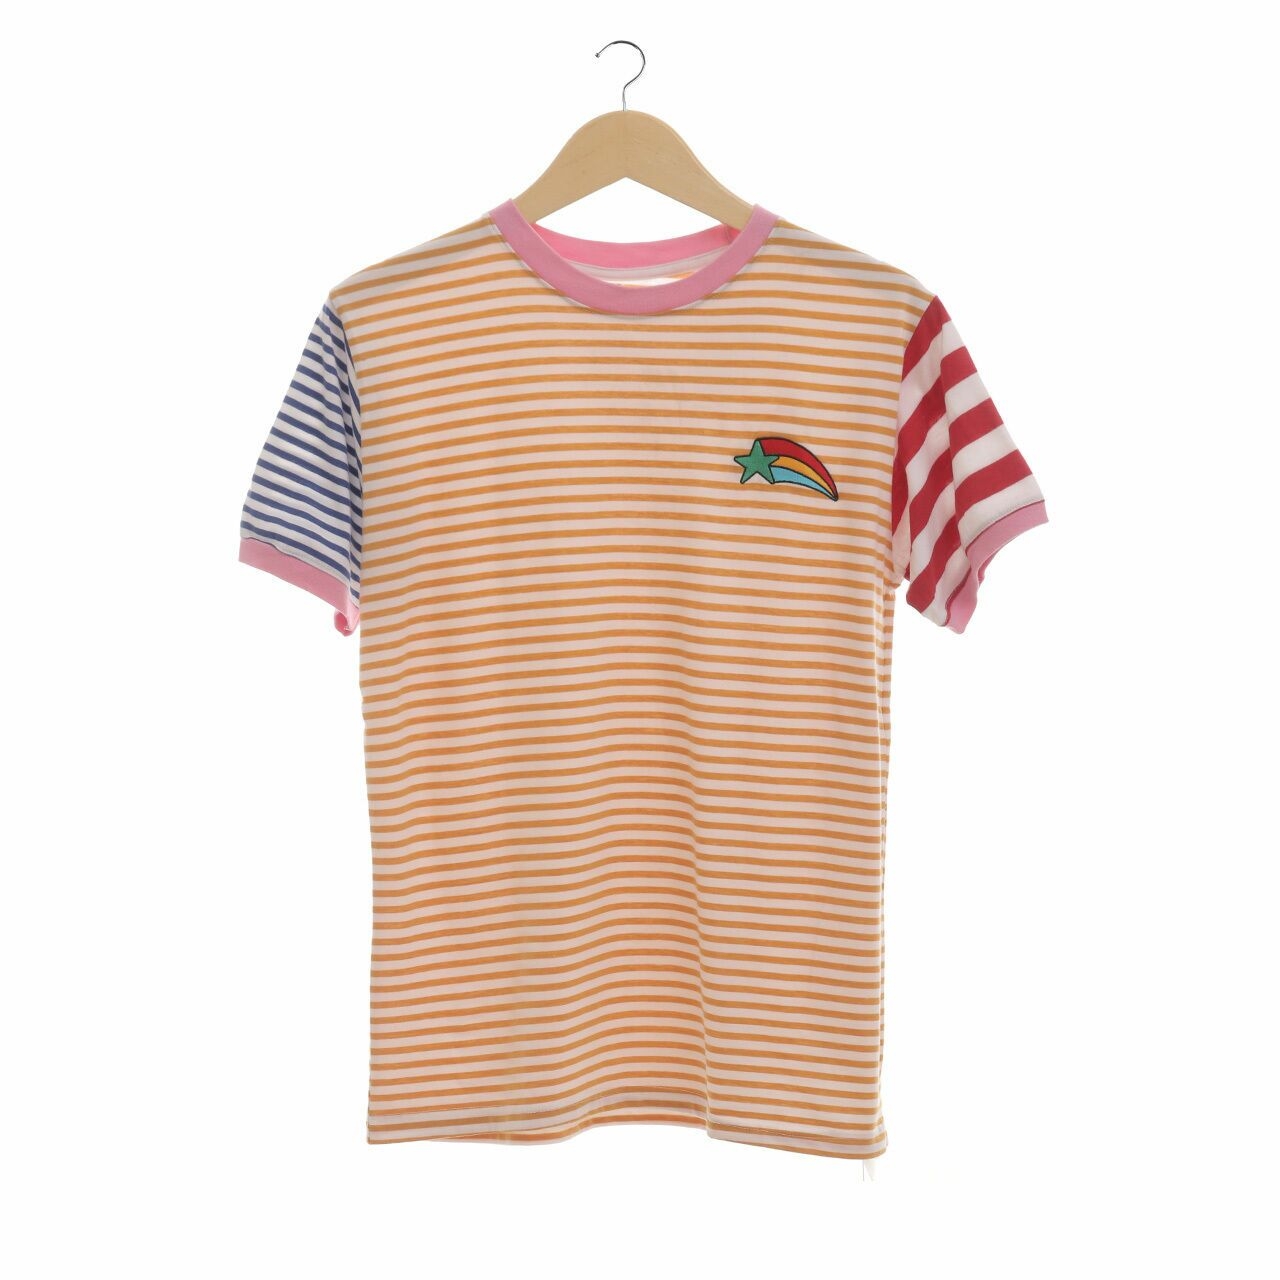 Private Collection Multi Stripes Star T-Shirt